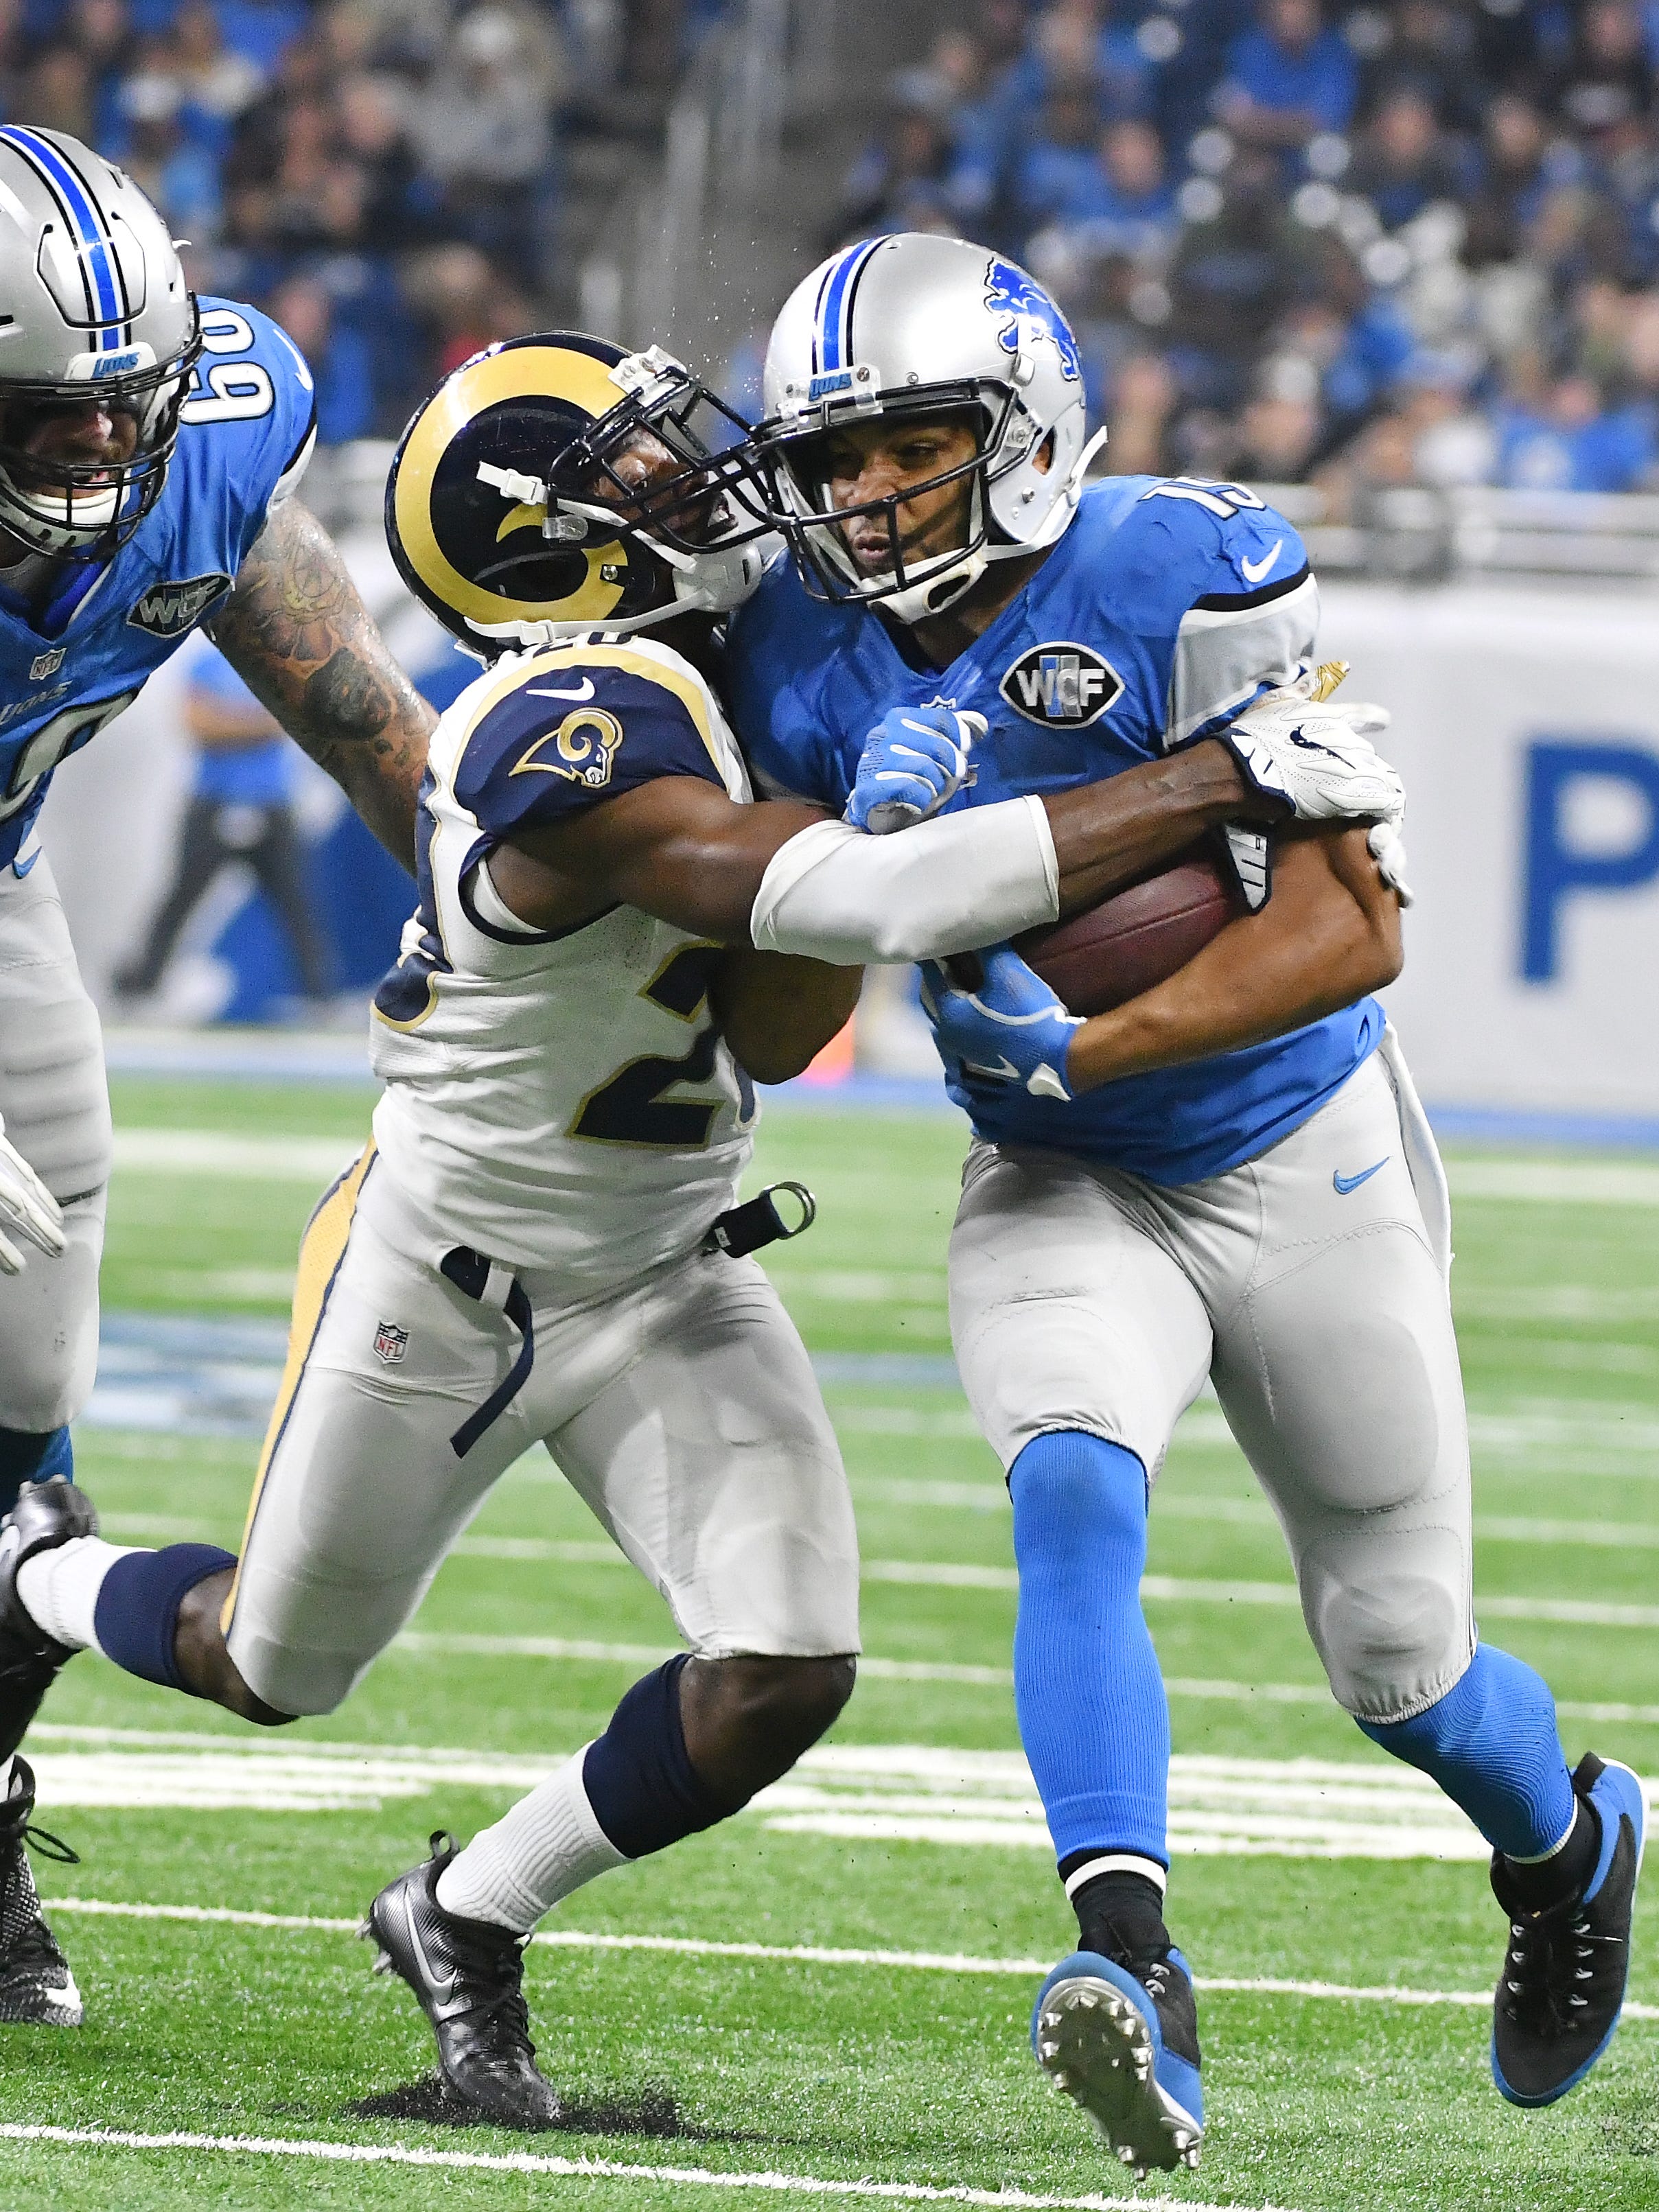 Lions wide receiver Golden Tate runs just short of a first down late in the fourth quarter with Rams Lamarcus Joyner eventually bringing him down.